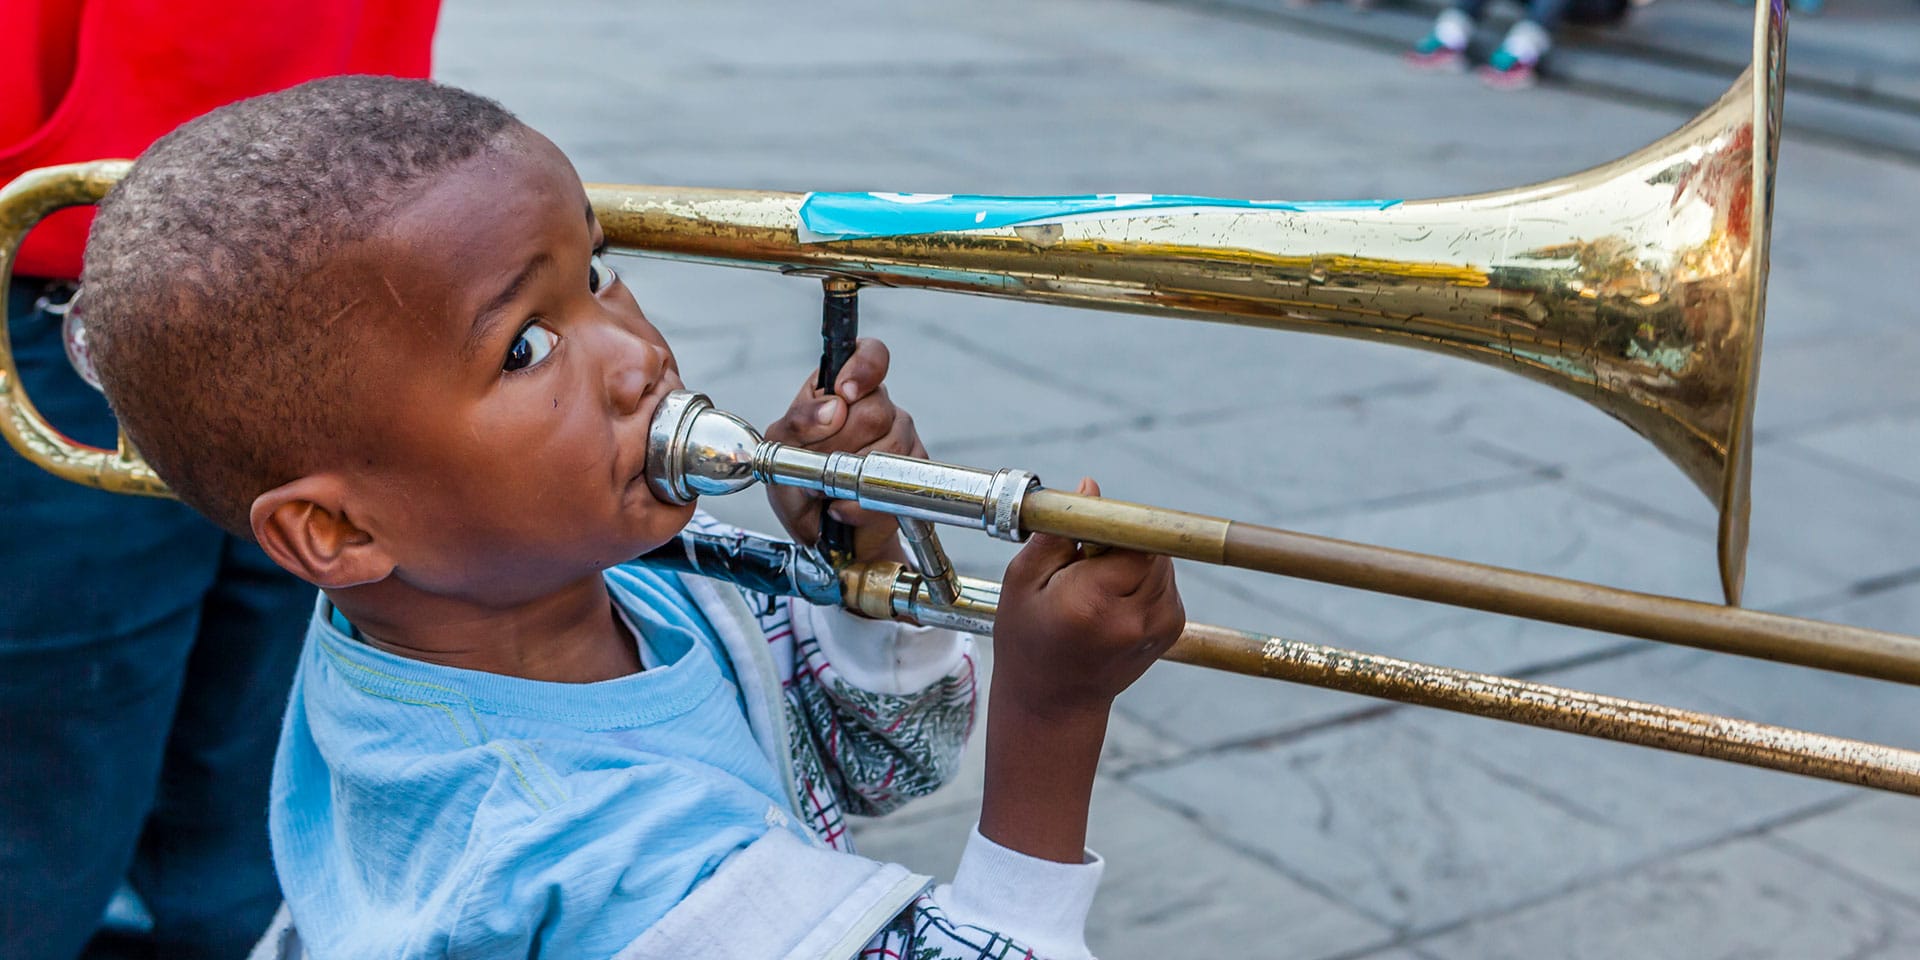 9 Things To Do In New Orleans With Kids